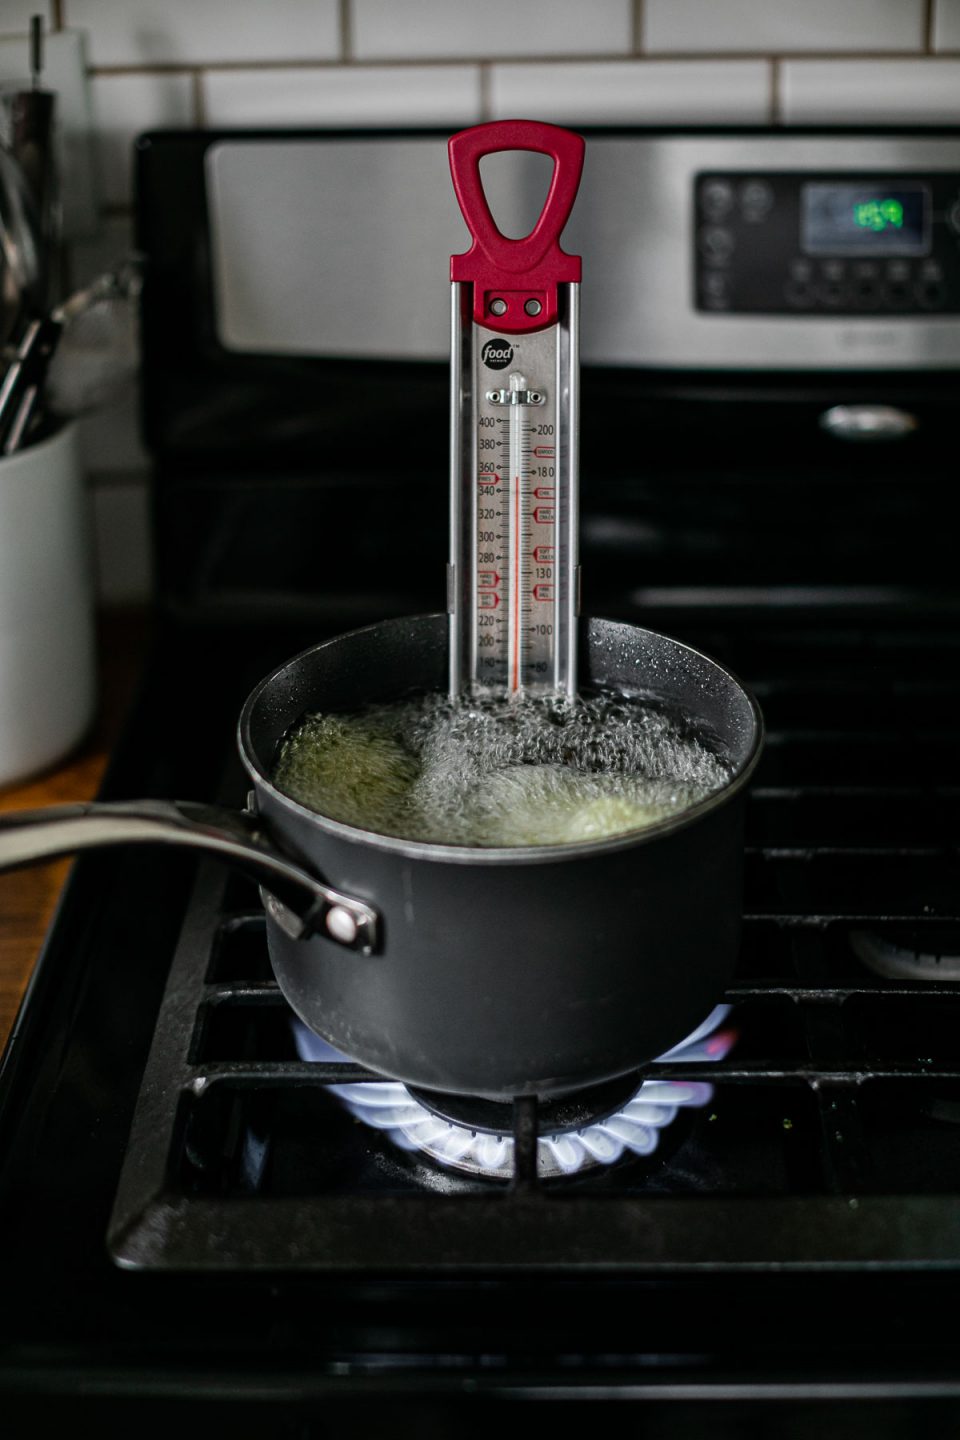 A black sauce pan filled with prepared oil for frying cooks a batch of herb green falafel balls. A candy thermometer rests inside of the sauce pan on top of a gas stovetop range. A crock filled with kitchen utensils sits atop an adjacent butcher block countertop and a white subway tile is shown in the background.